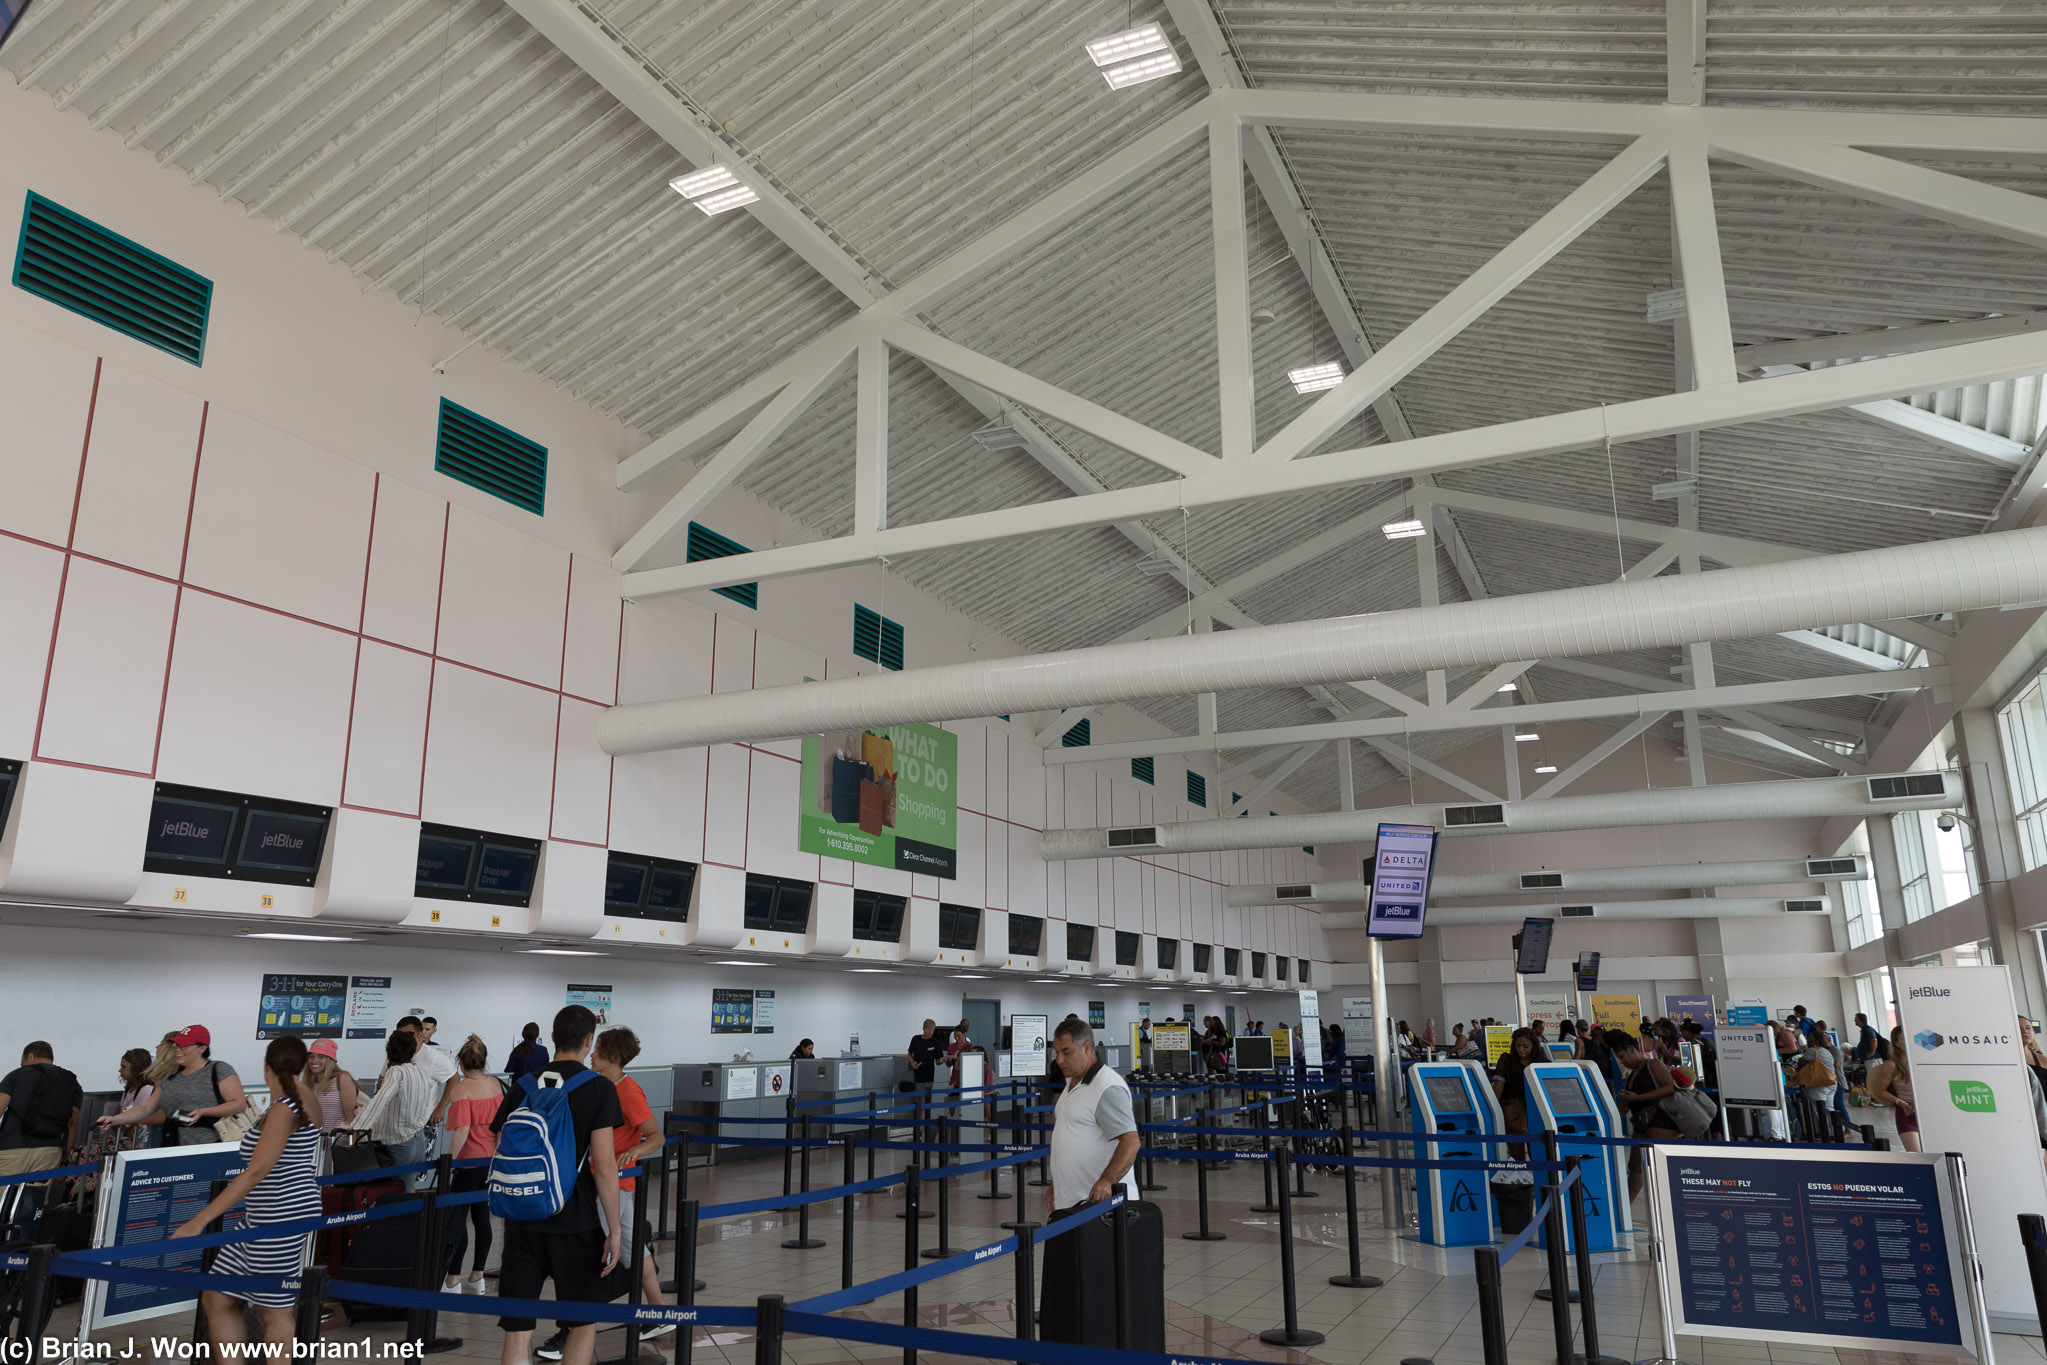 The US Preclearance check-in area.